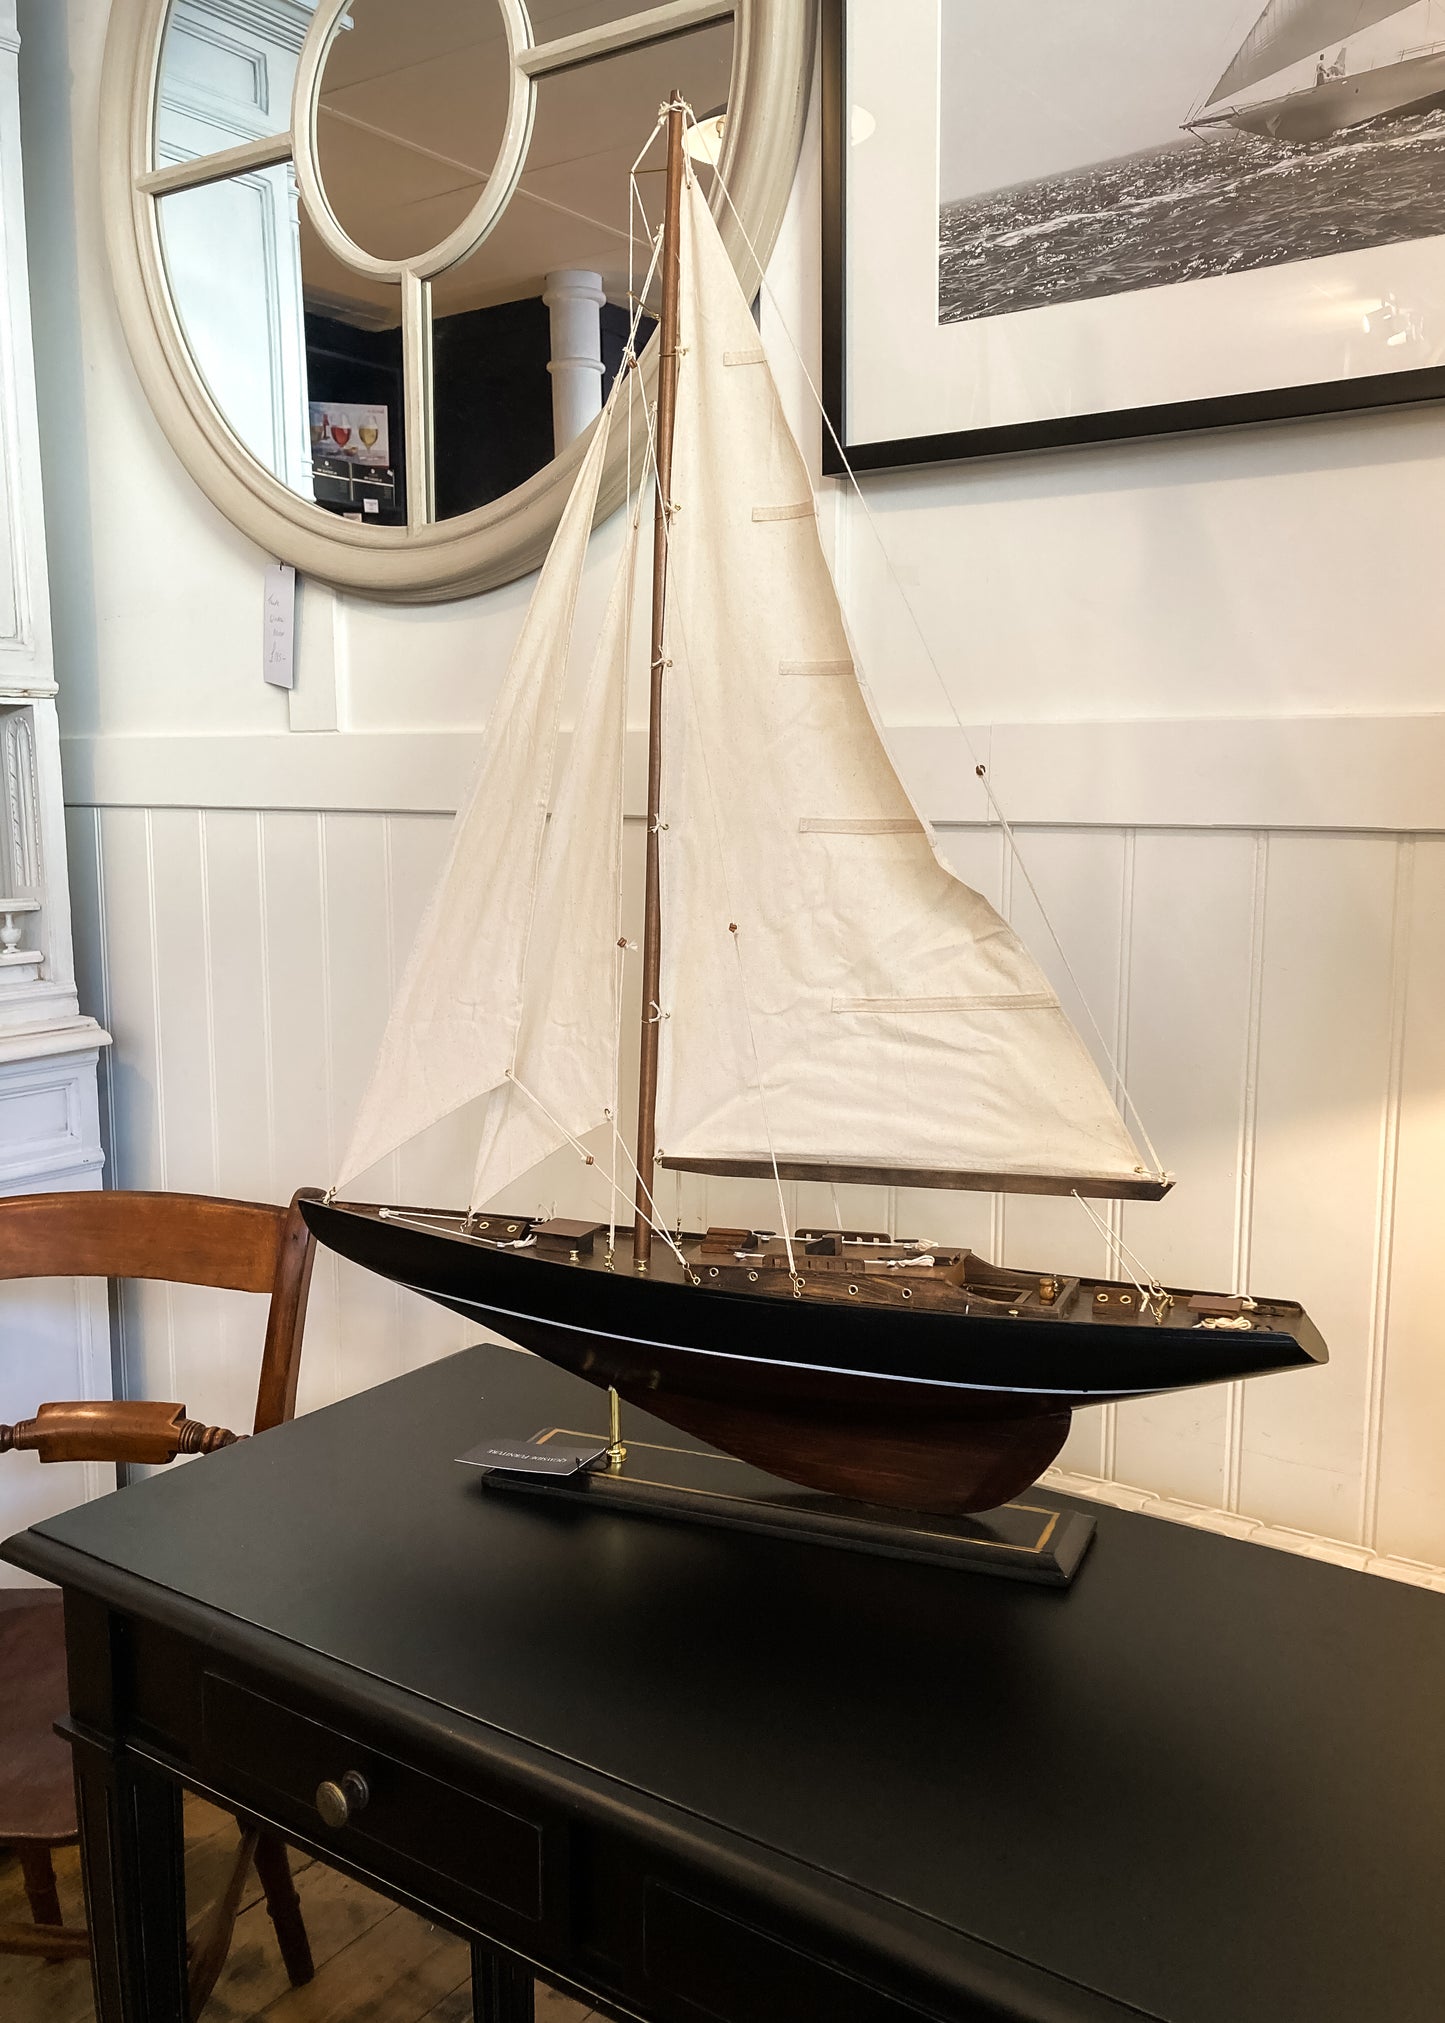 Load image into Gallery viewer, Model Sail Yacht
